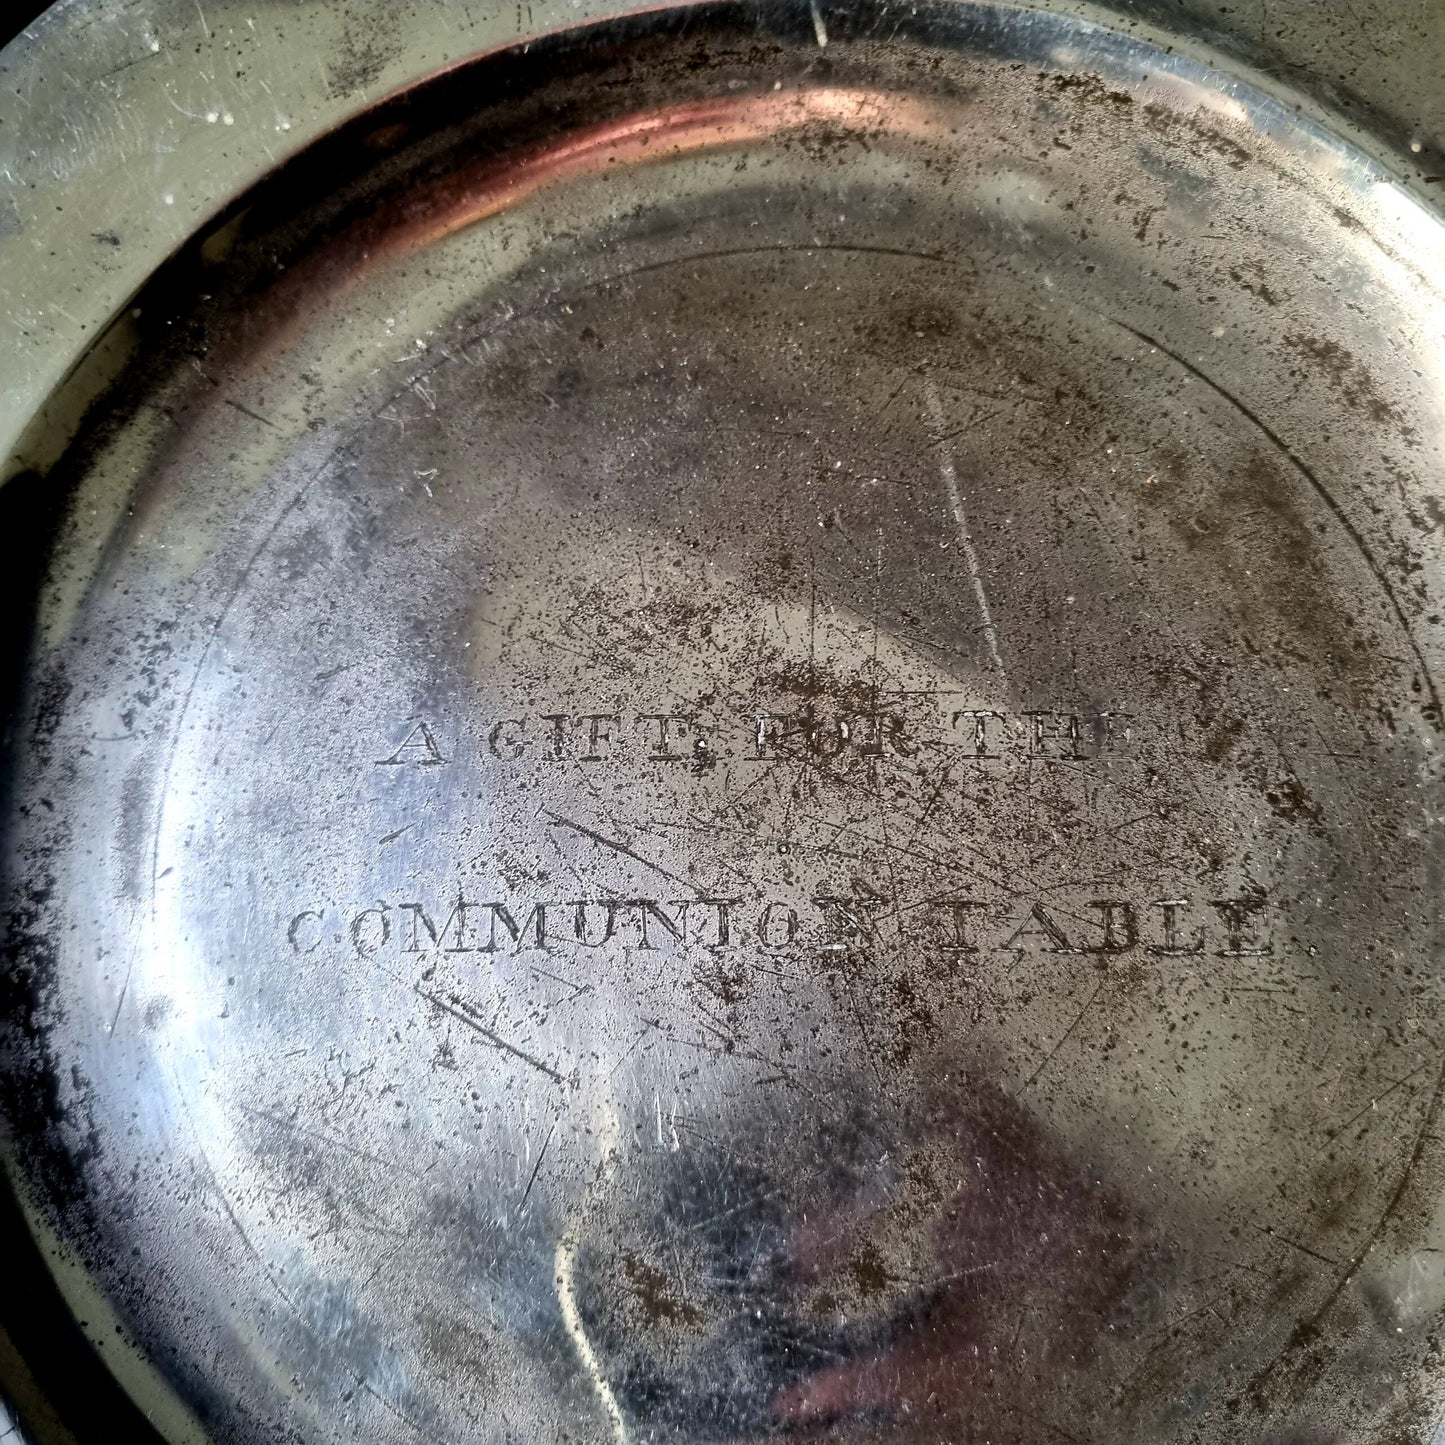 18th Century English Antique Pewter Communion Wafer Plate or Collection Plate, Inscribed "a gift for the communion table", Bearing London Touchmarks